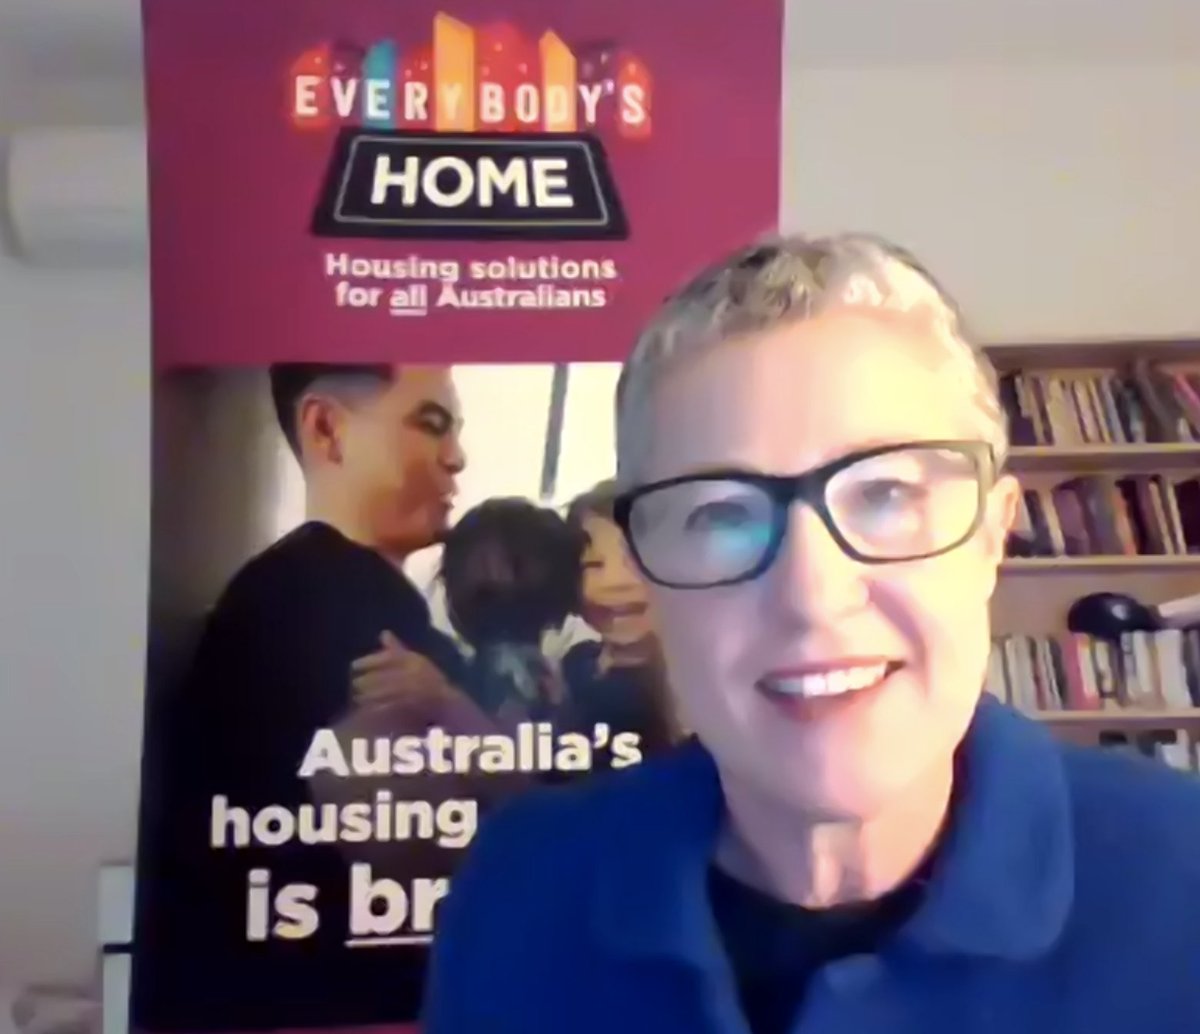 Housing is fundamental to wellbeing - we must get it right. We need your help. - @ColvinKate #Housing4Safety #WomensSafetySummit #auspol @_EverybodysHome